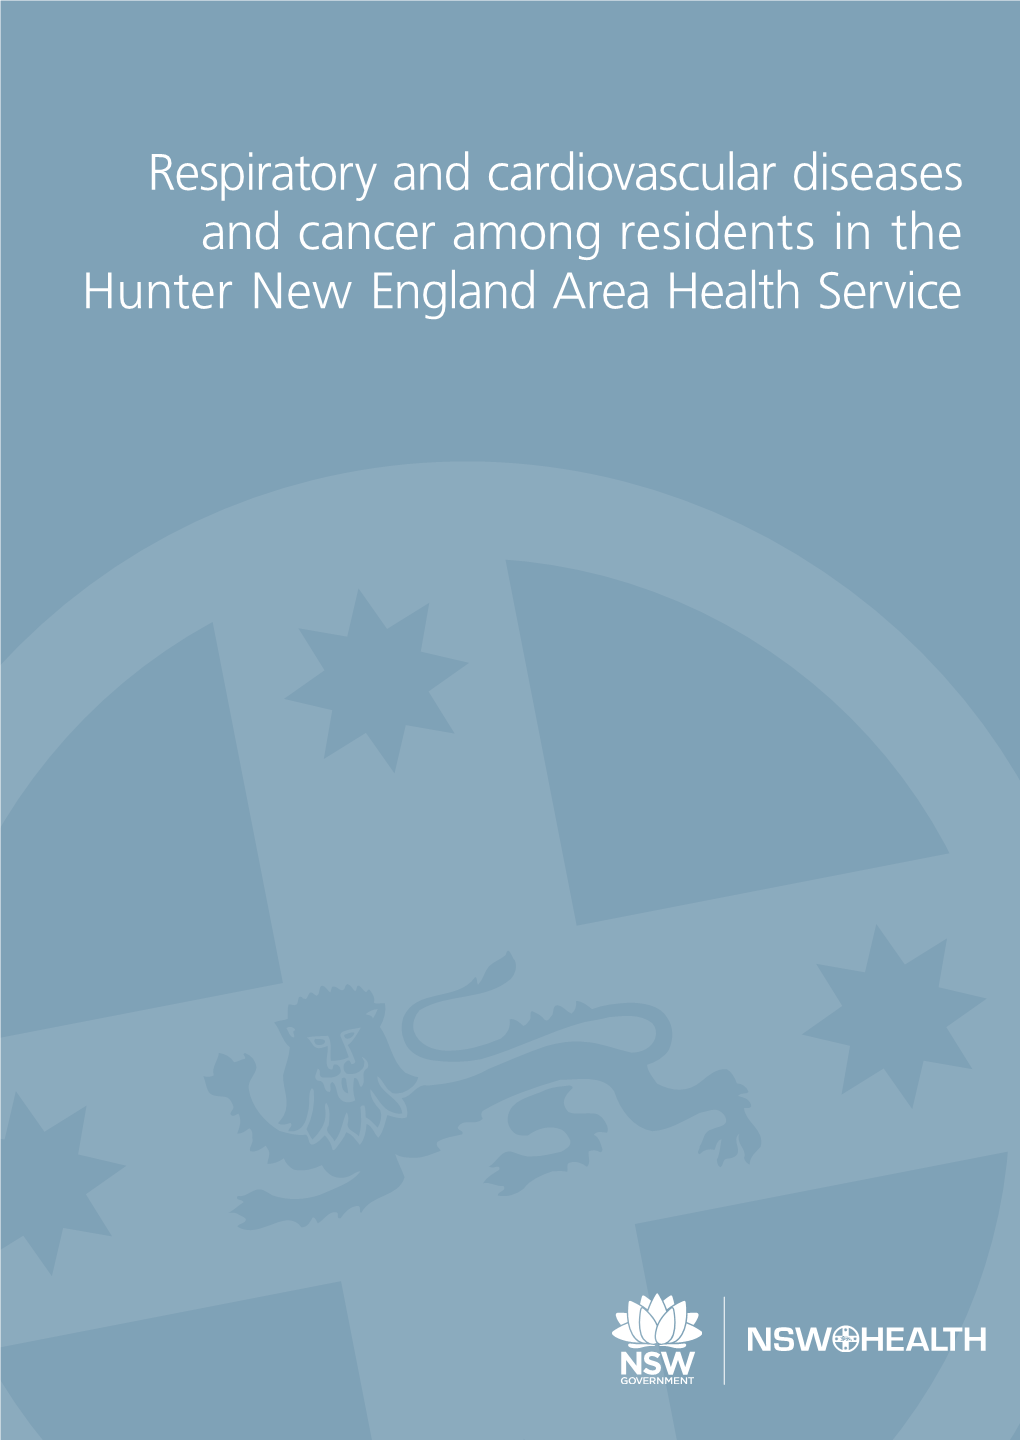 Respiratory and Cardiovascular Diseases and Cancer Among Residents in the Hunter New England Area Health Service